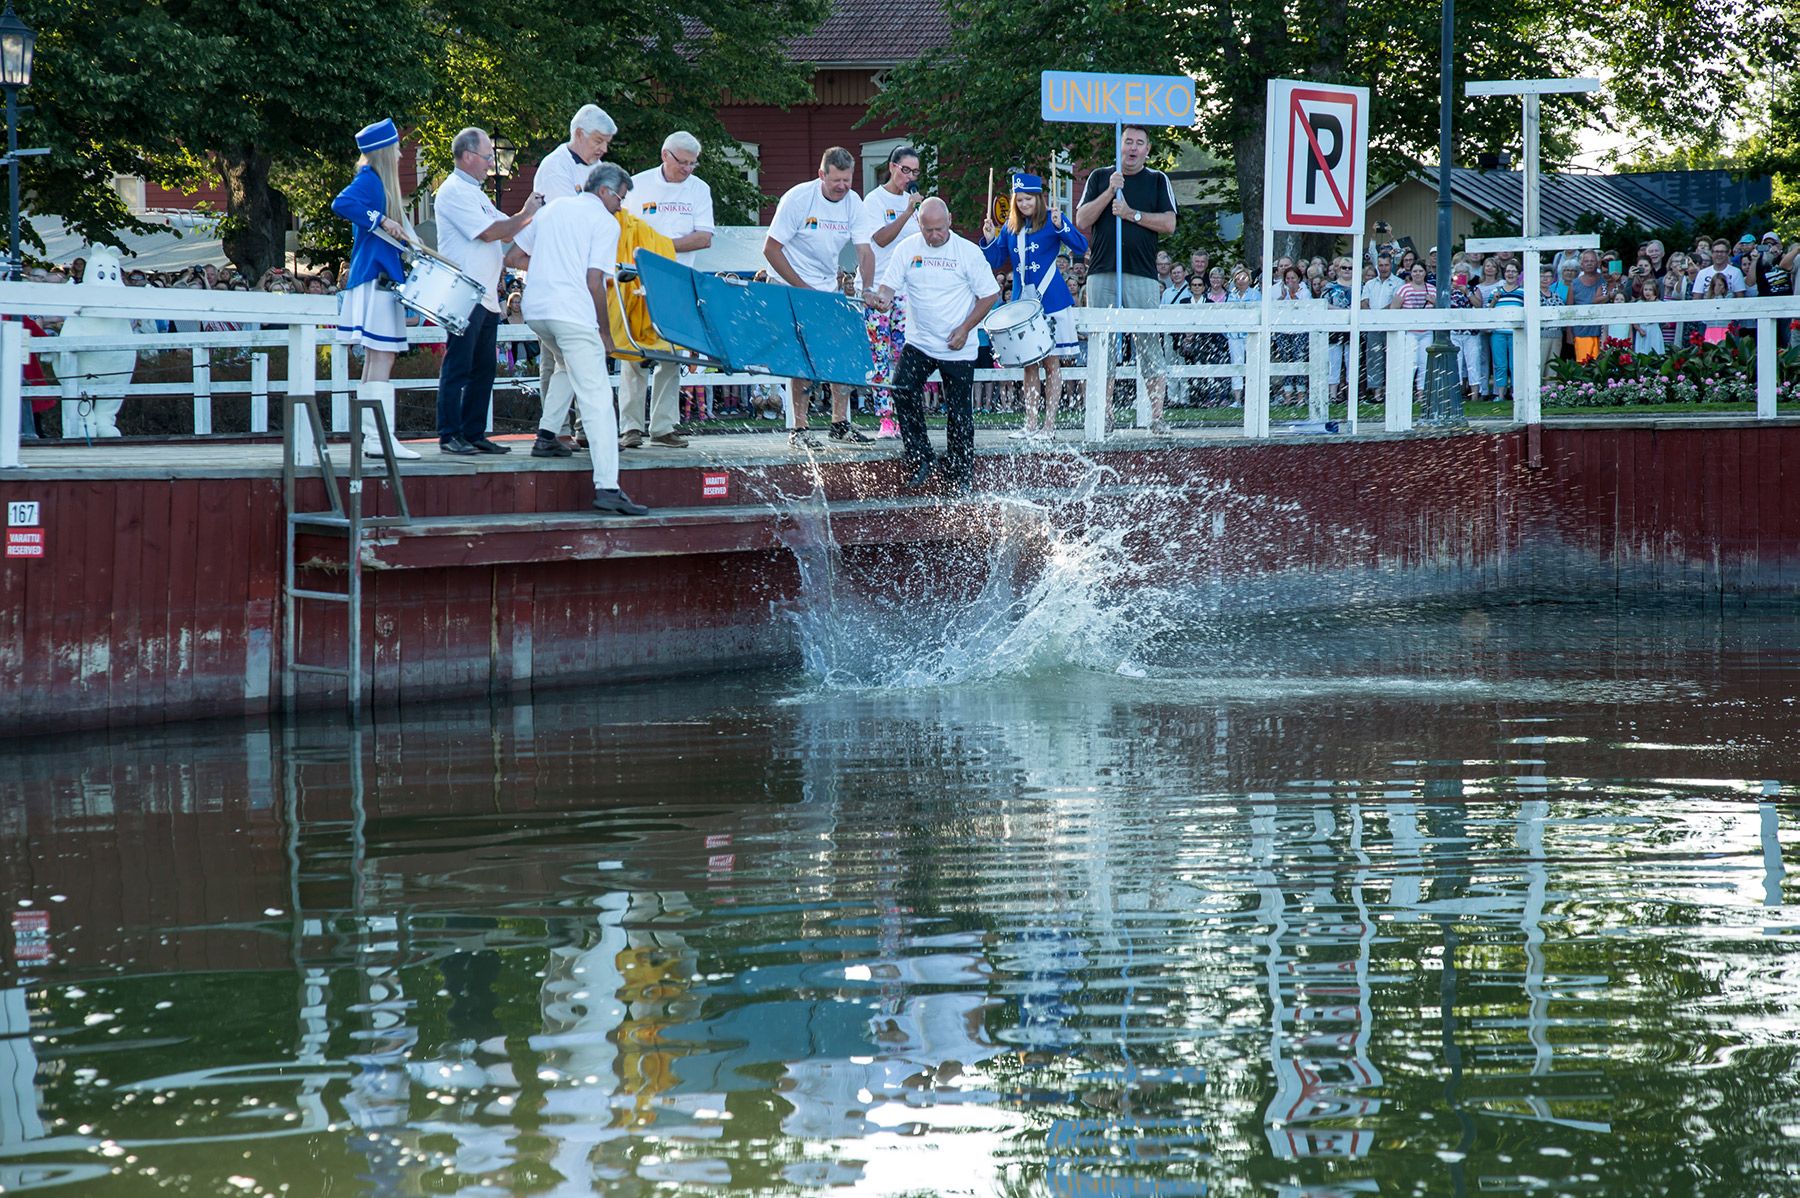 Visitors look on as a person is a thrown from their bed into the water in Naantali.